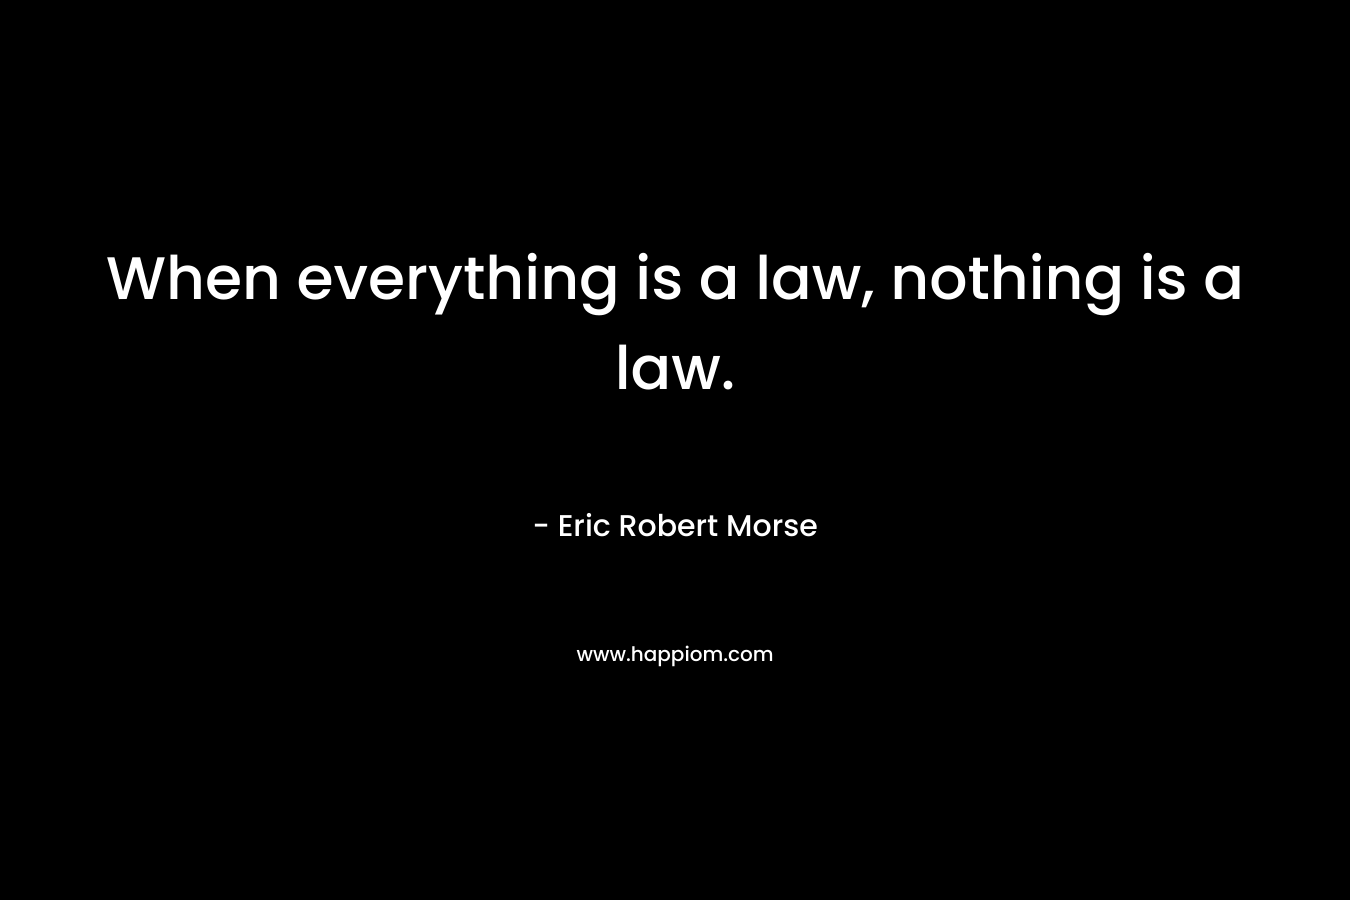 When everything is a law, nothing is a law.